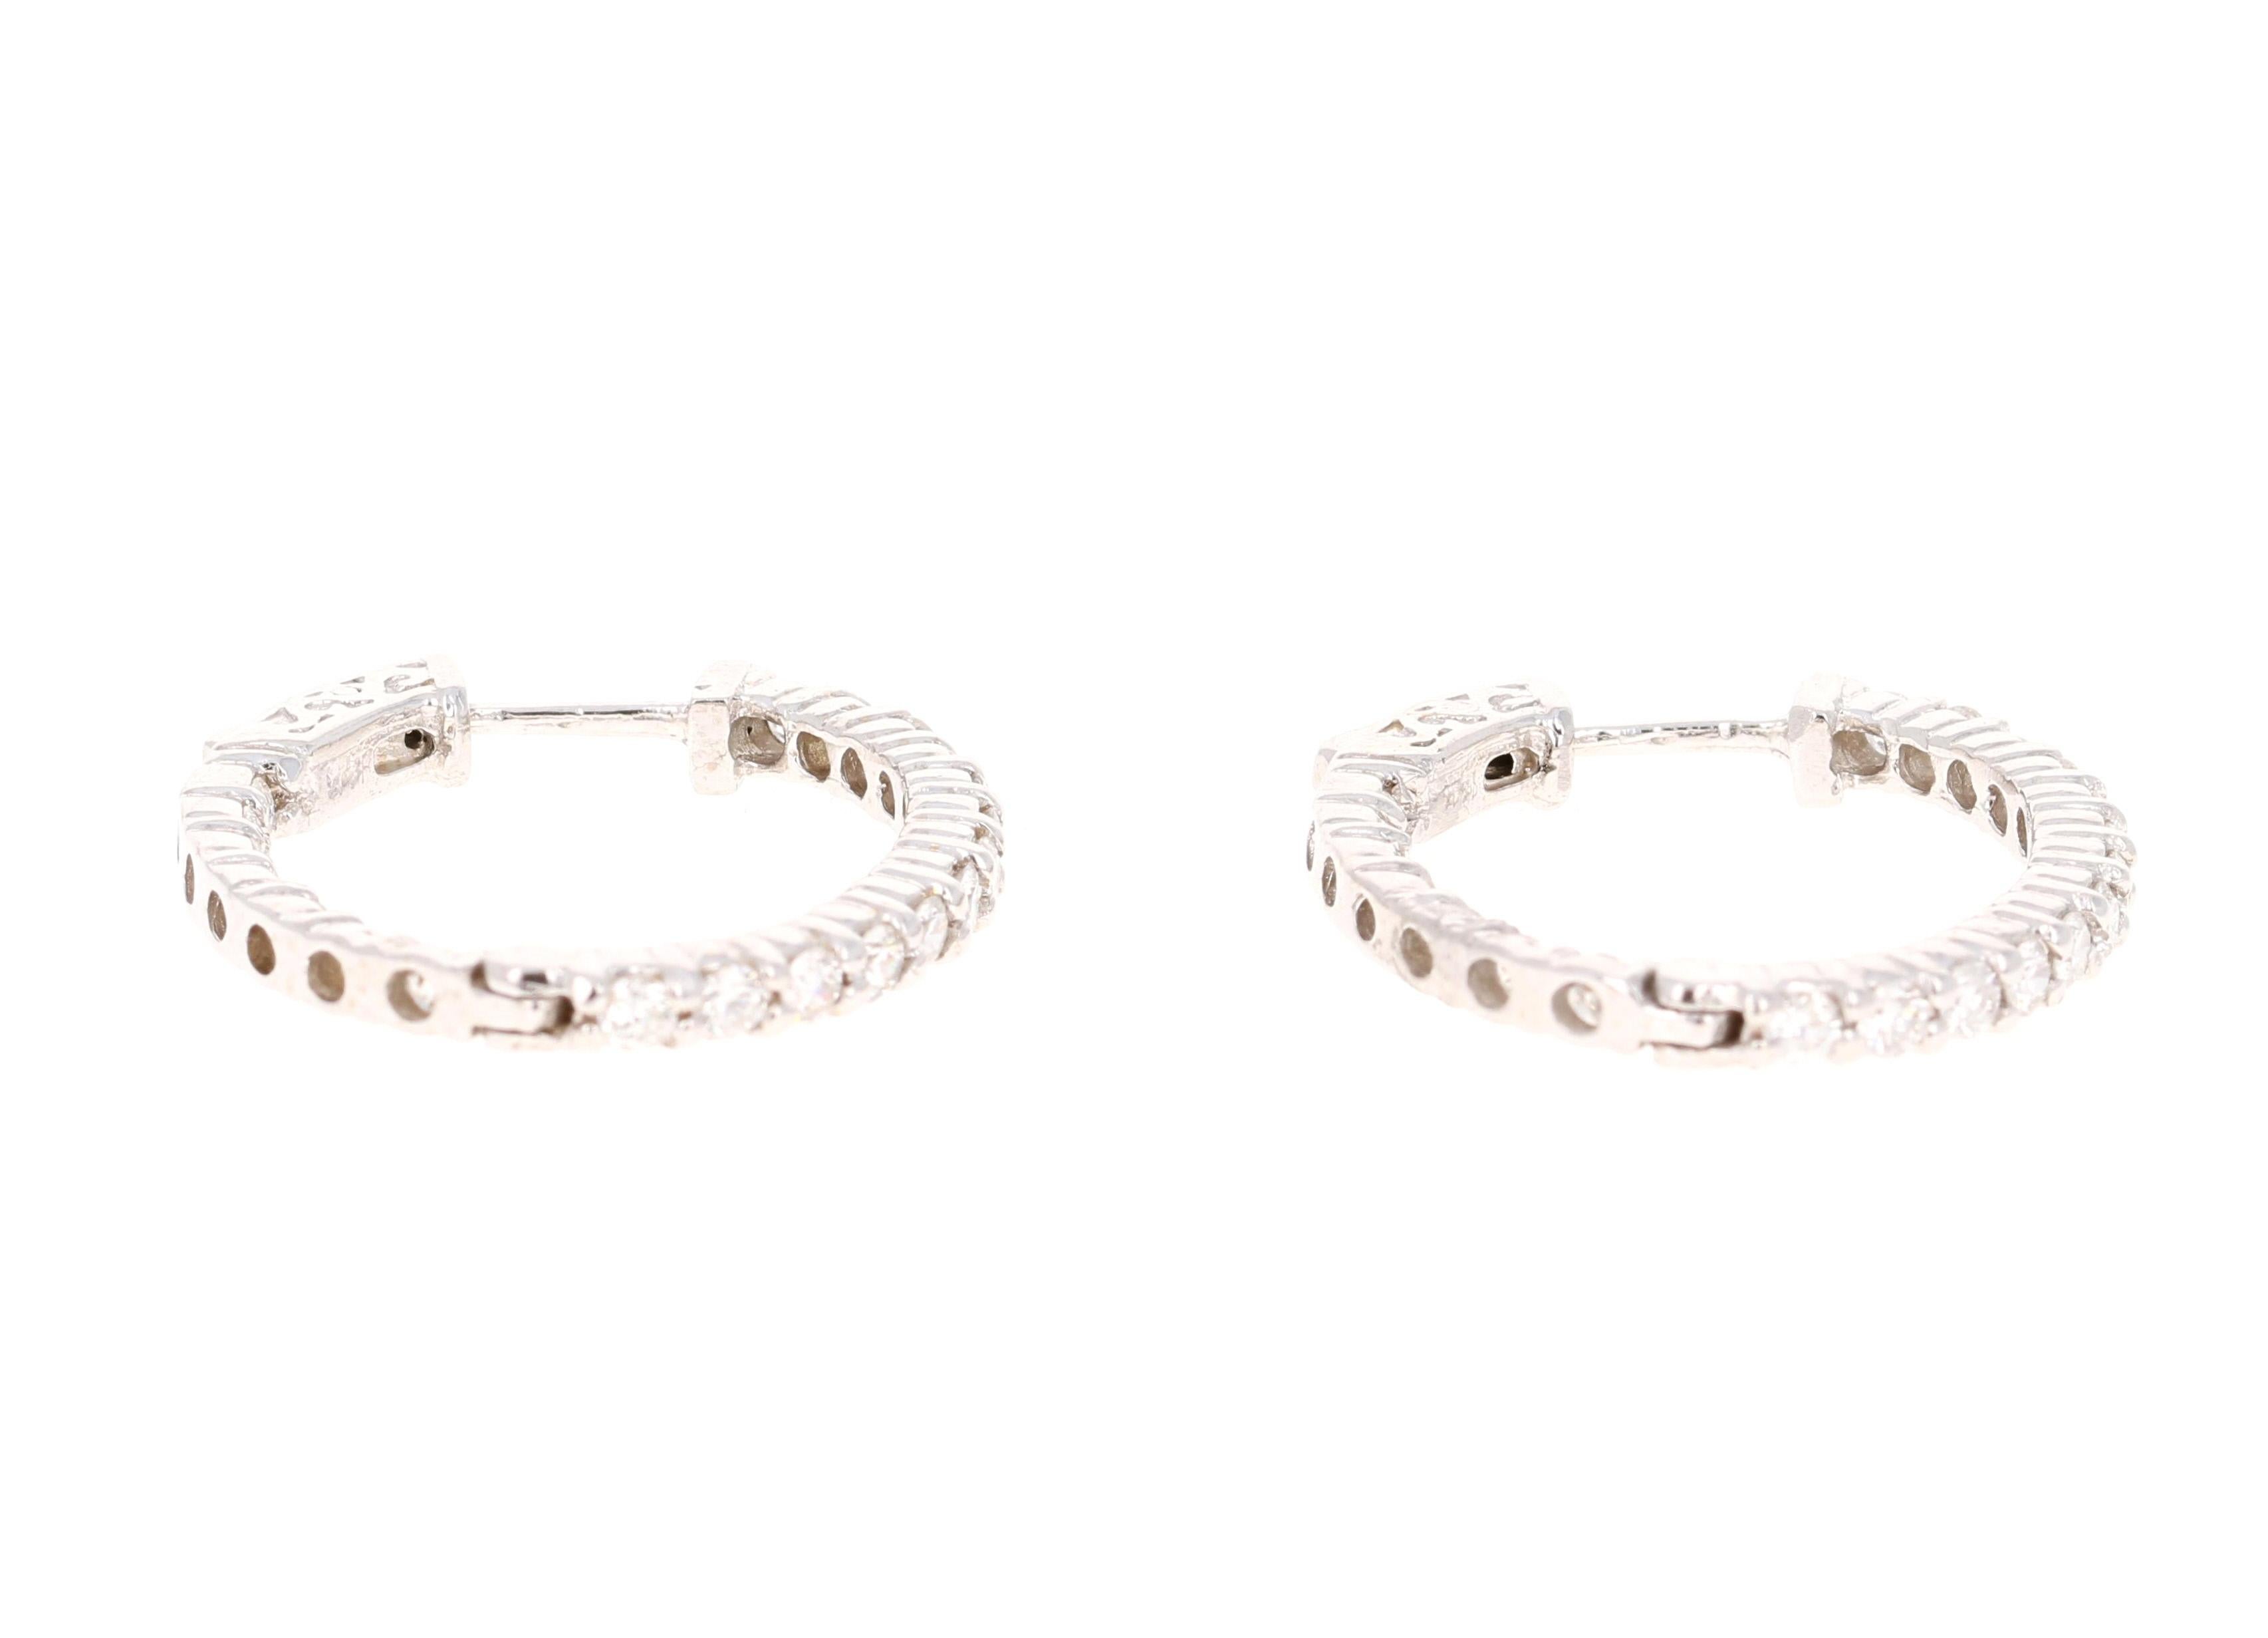 These gorgeous hoop earrings are ideal as everyday earrings or even for those special night outs. 

These earrings have 40 Round Cut Diamonds aligned both on the inside and outside of the hoop and weigh a total of 1.18 Carats. (Clarity: SI, Color: